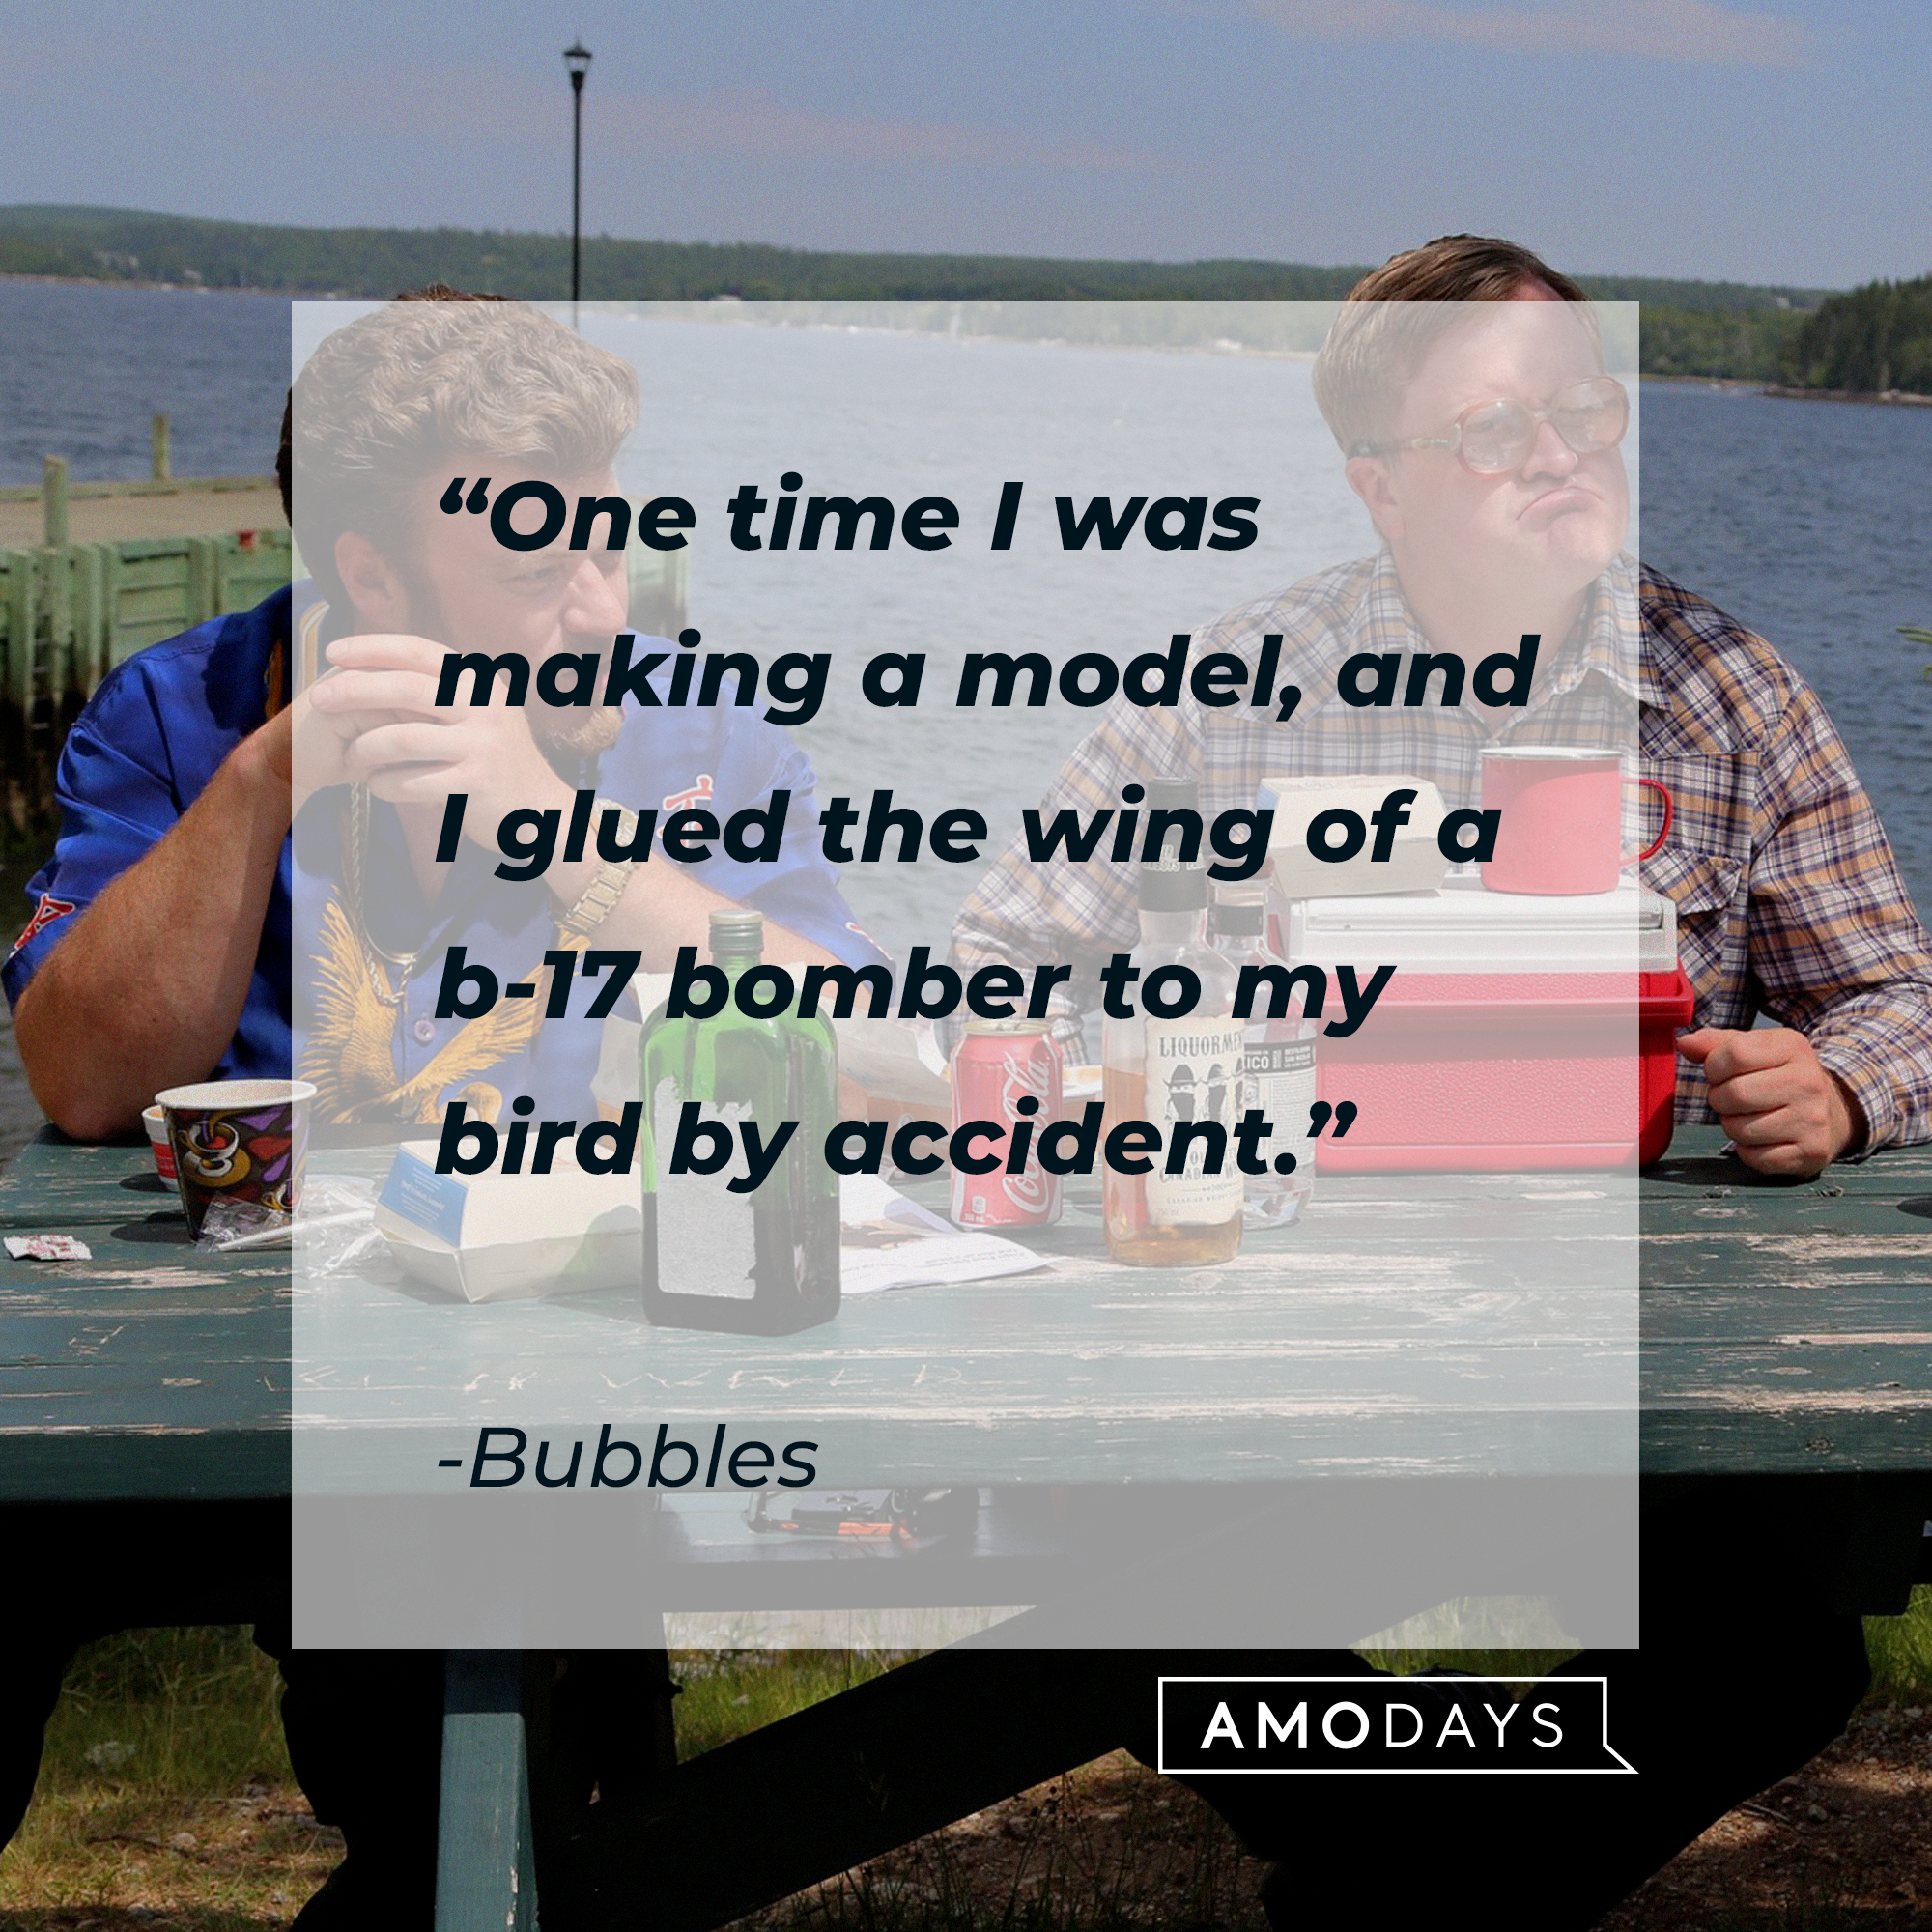 Bubbles's quote: “One time I was making a model, and I glued the wing of a b-17 bomber to my bird by accident.” | Source: facebook.com/trailerparkboys